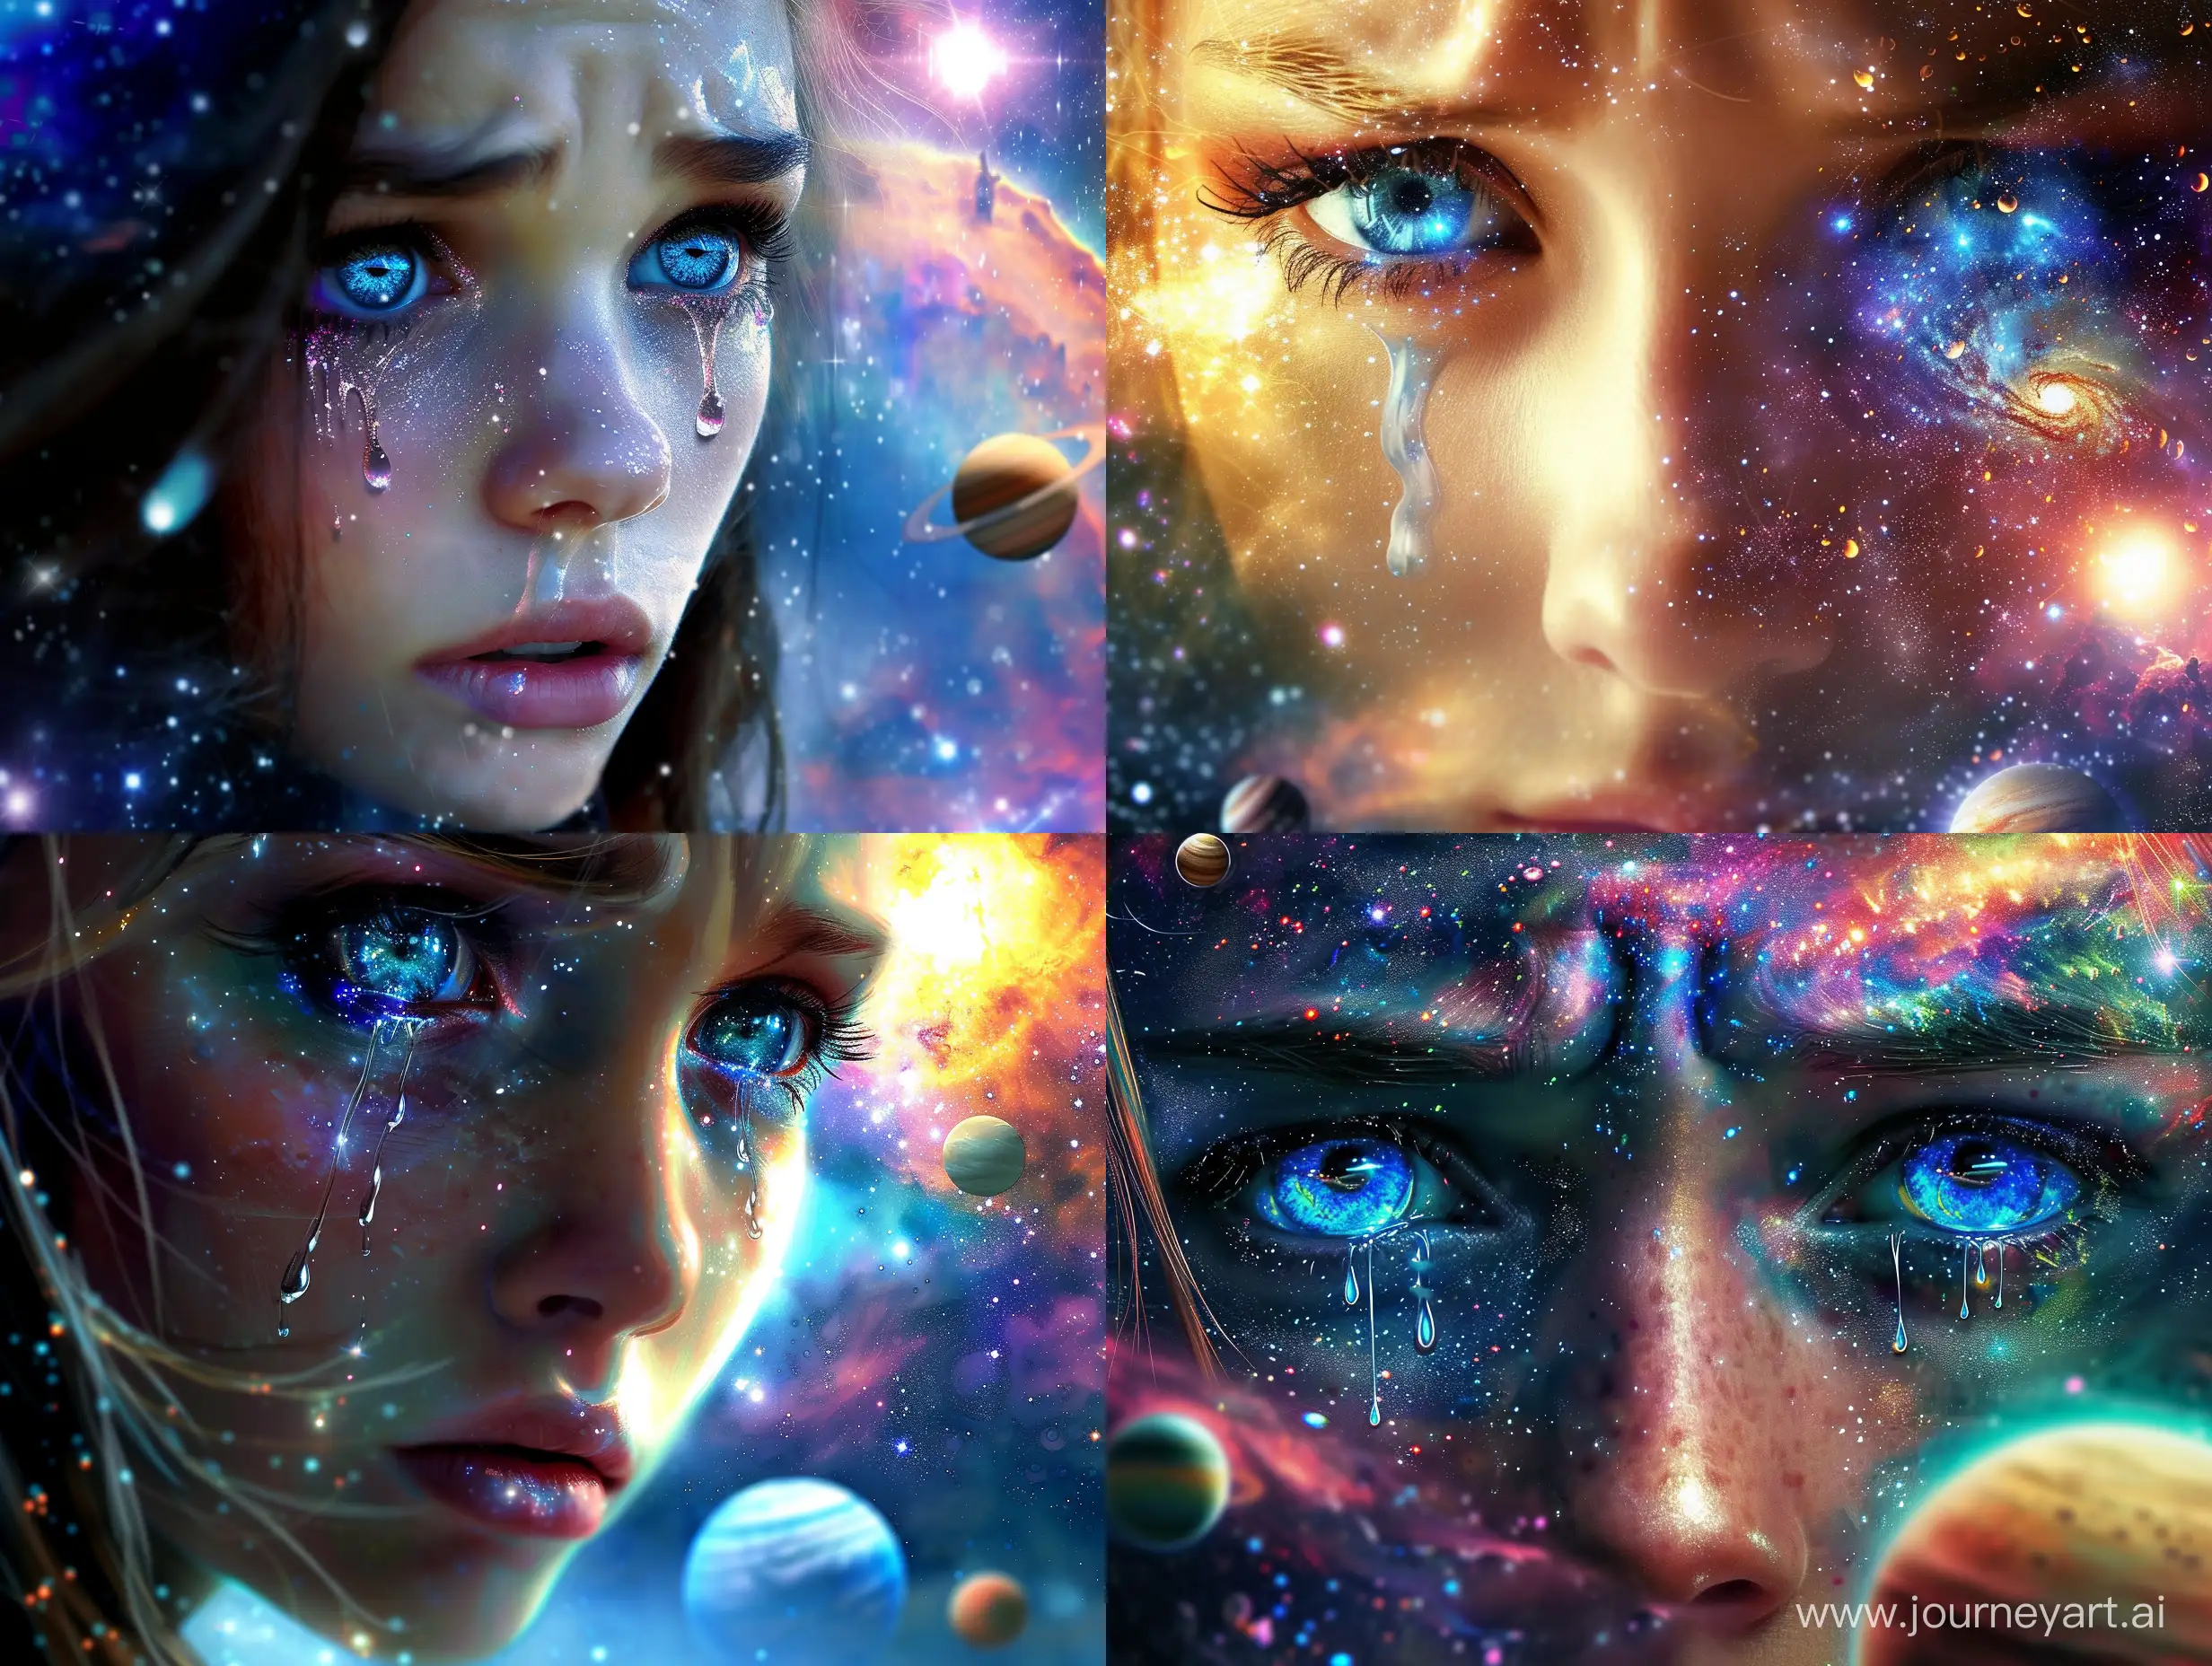 A beautiful sparkling female. Angel like, aquamarine blue eyes. Looking straight while tears fall from her eyes. Background is the colorful Nebulas and endless planets.